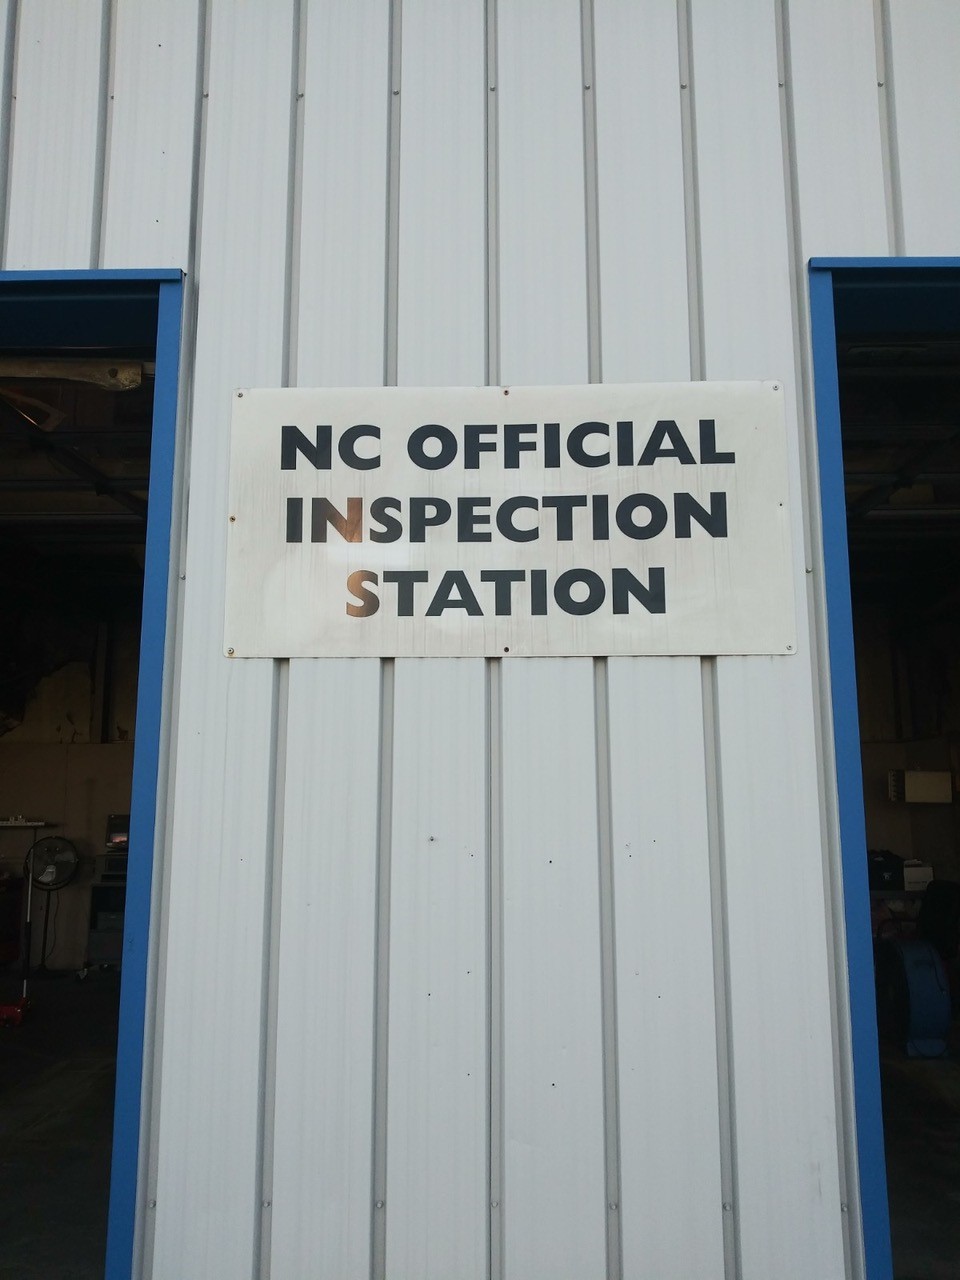 Only Inspections Photo